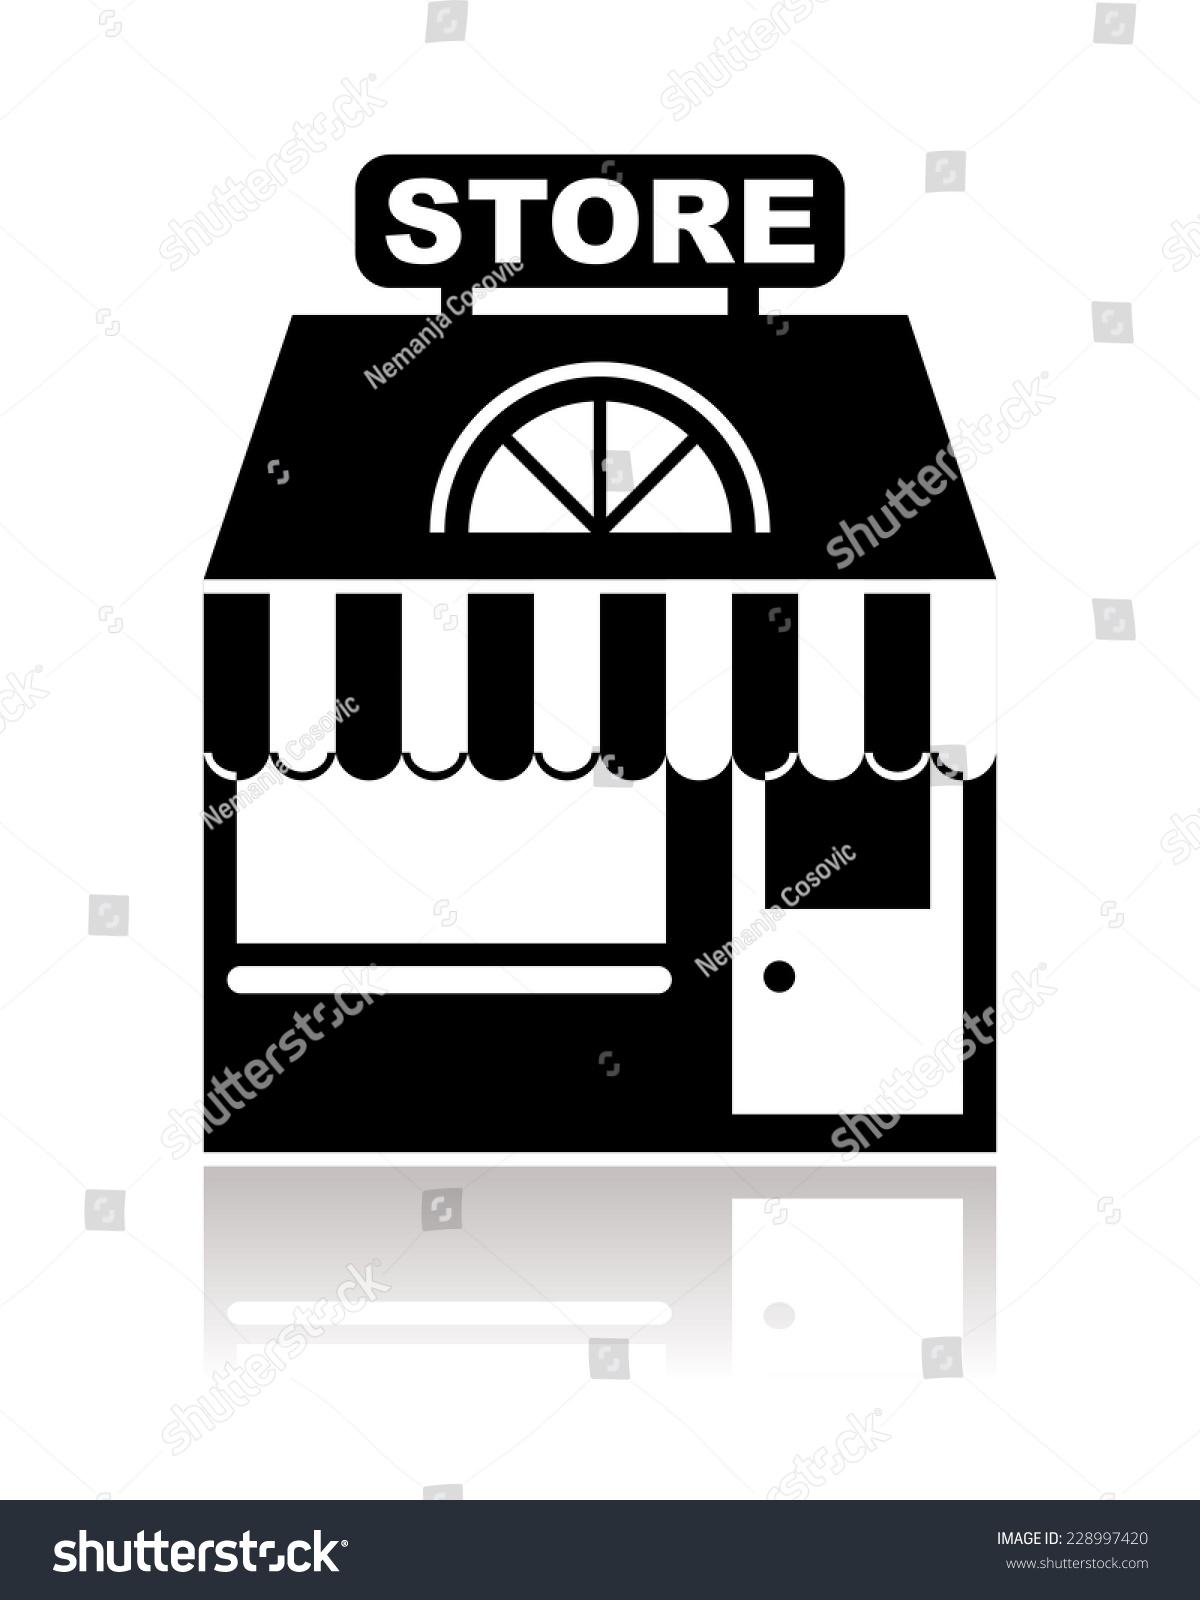 shop clipart black and white - photo #28